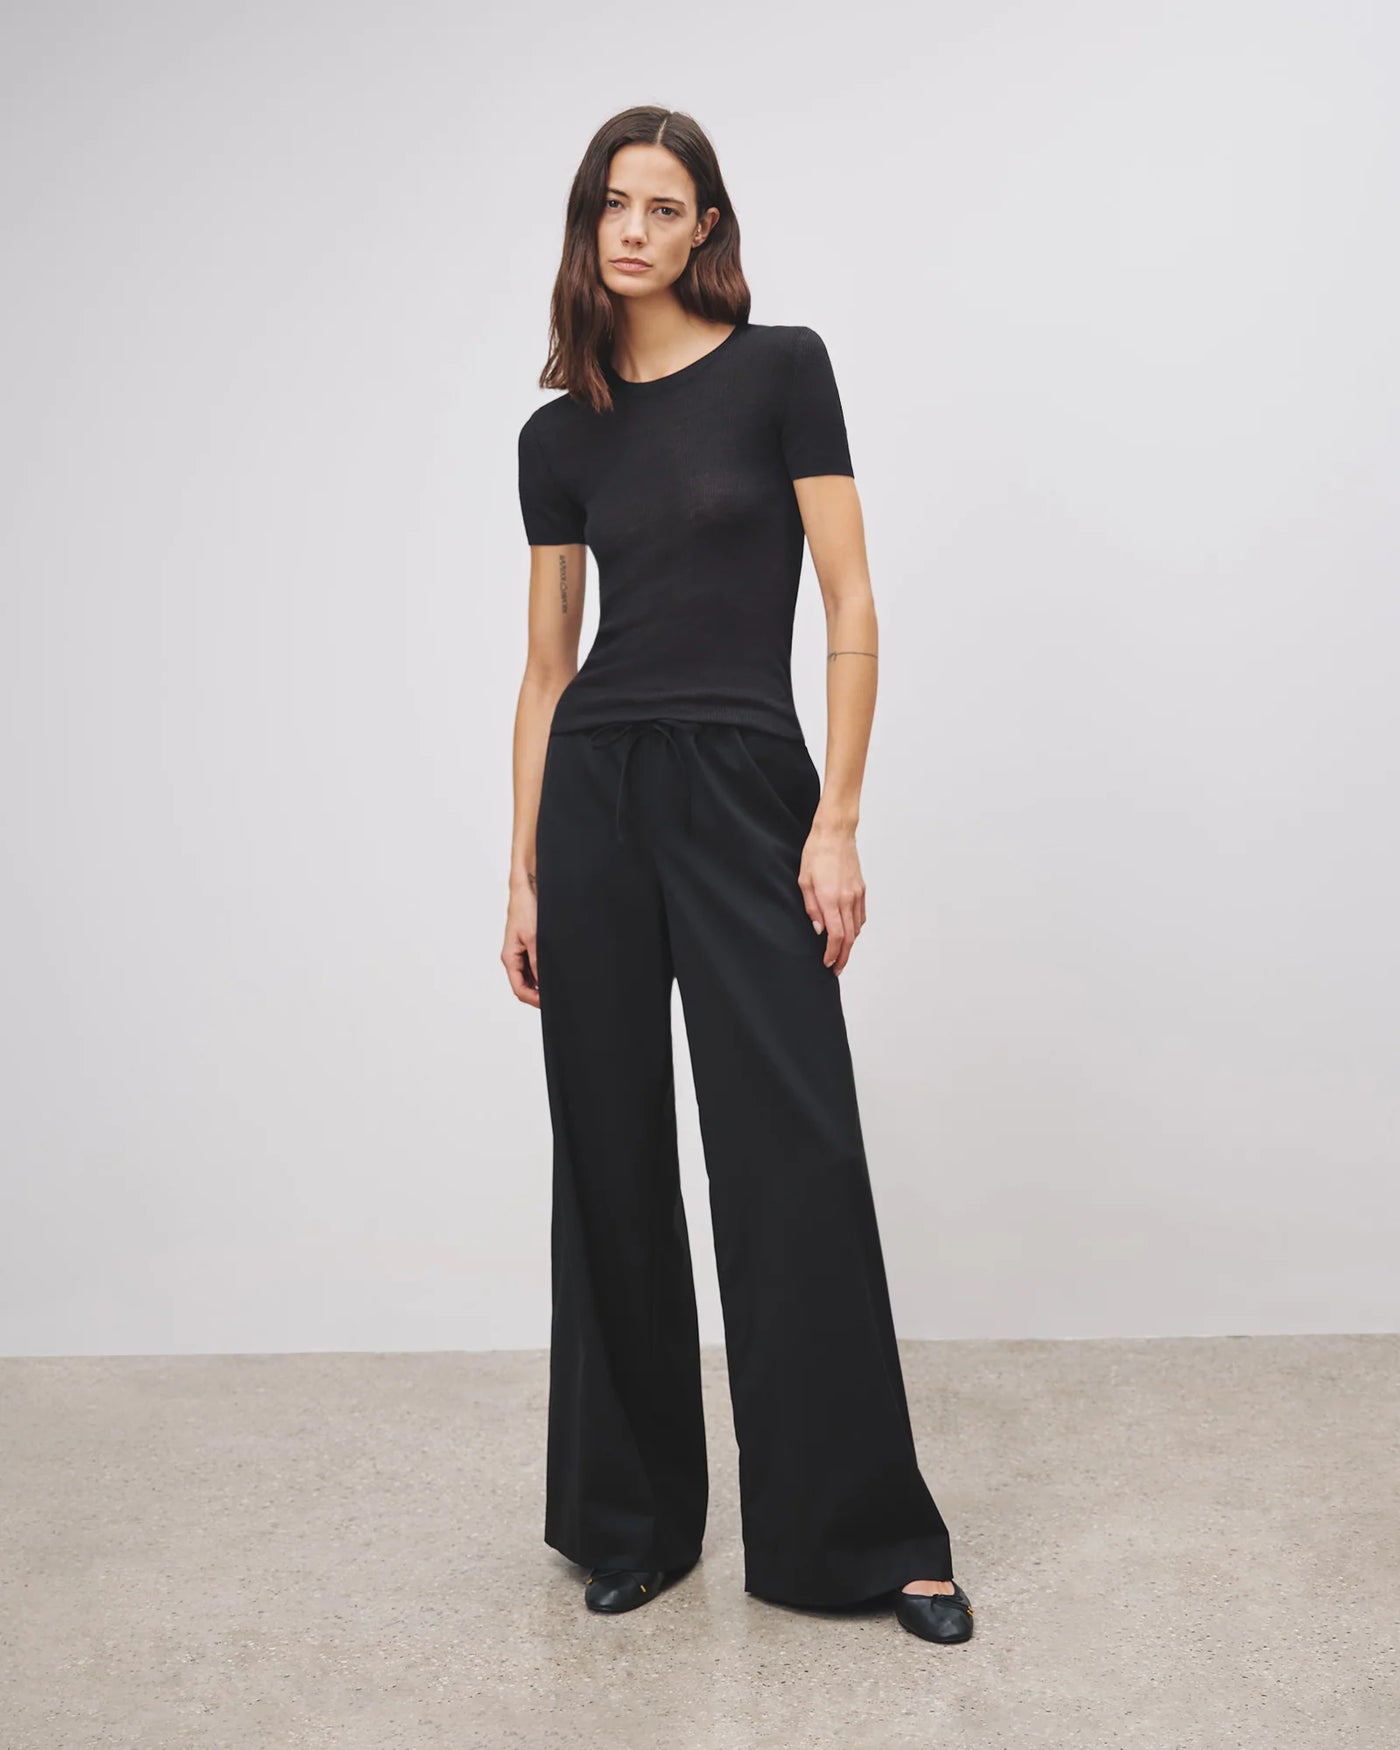 ADRIEL RELAX PANT IN BLACK - Romi Boutique